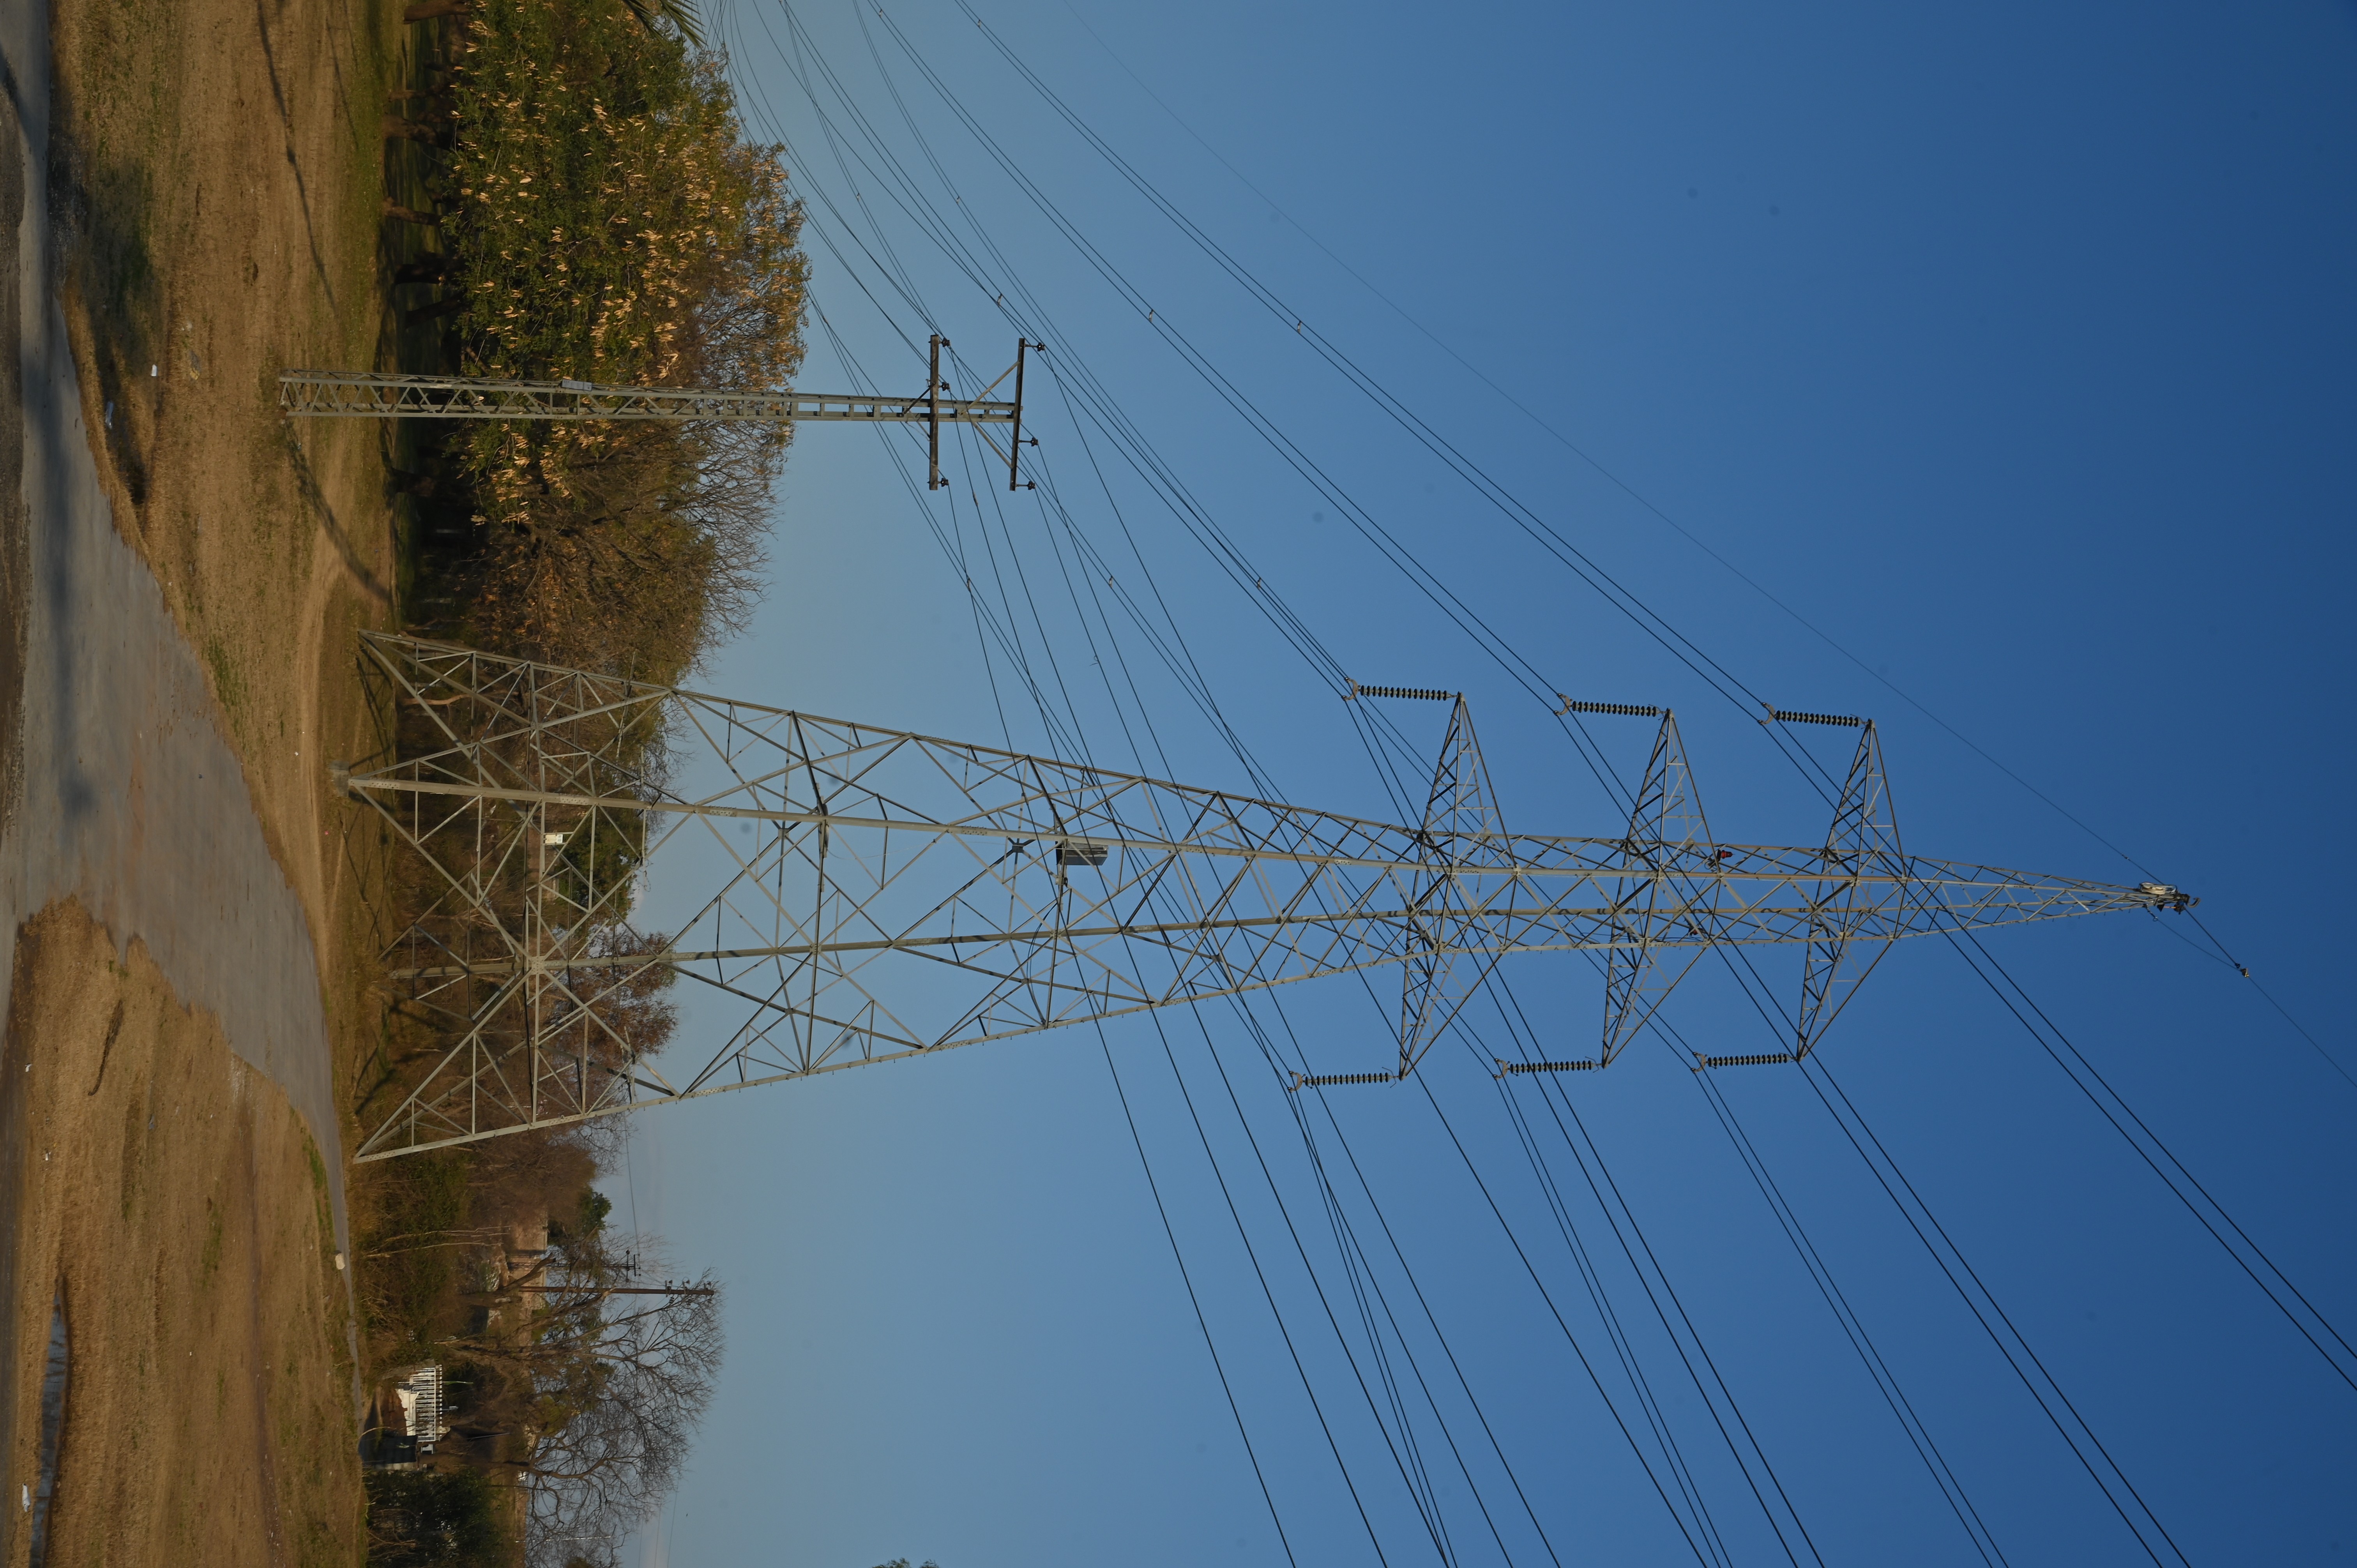 High-power electricity poles used for the supply and transmission of energy